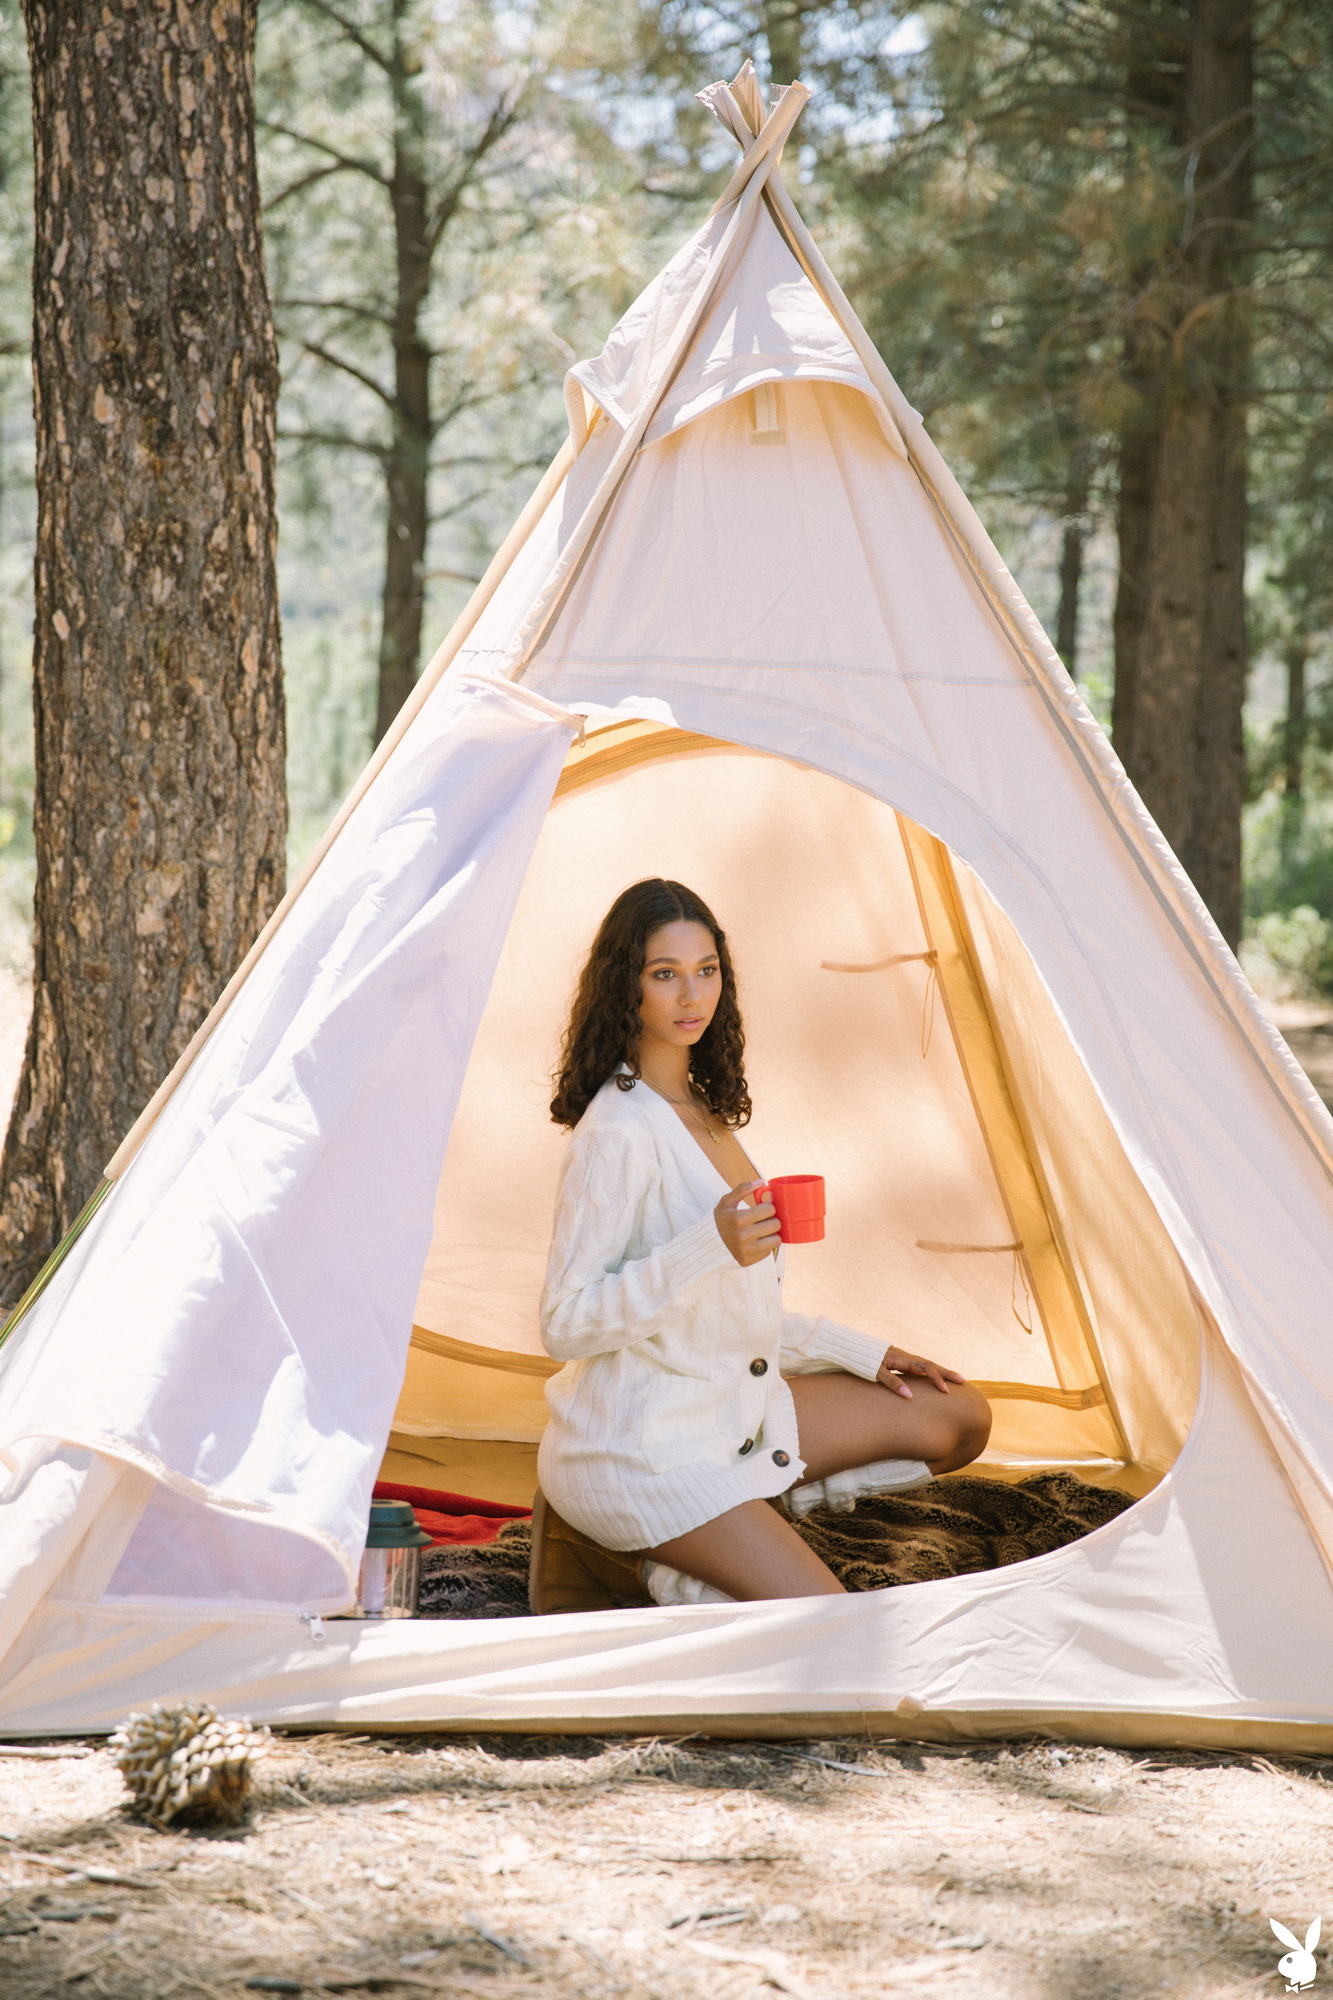 maia-serena-tranquil-setting-naked-brunette-tent-woods-playboy-01